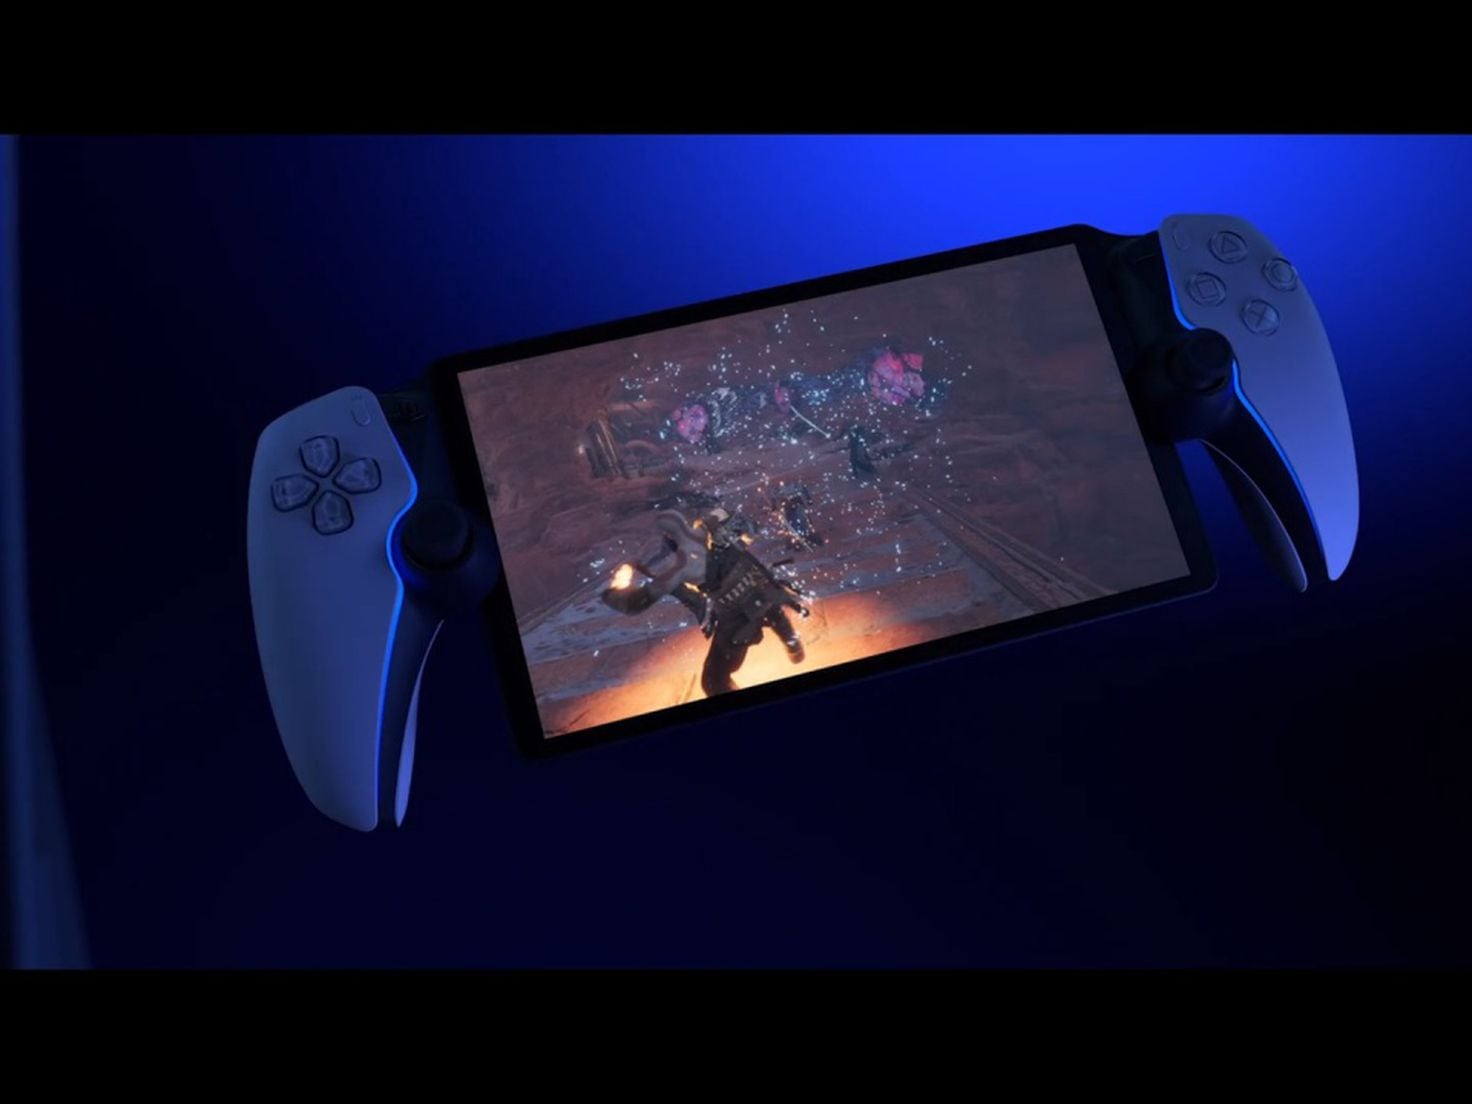 Q-Lite PS5 Handheld Could Launch This November Alongside Other